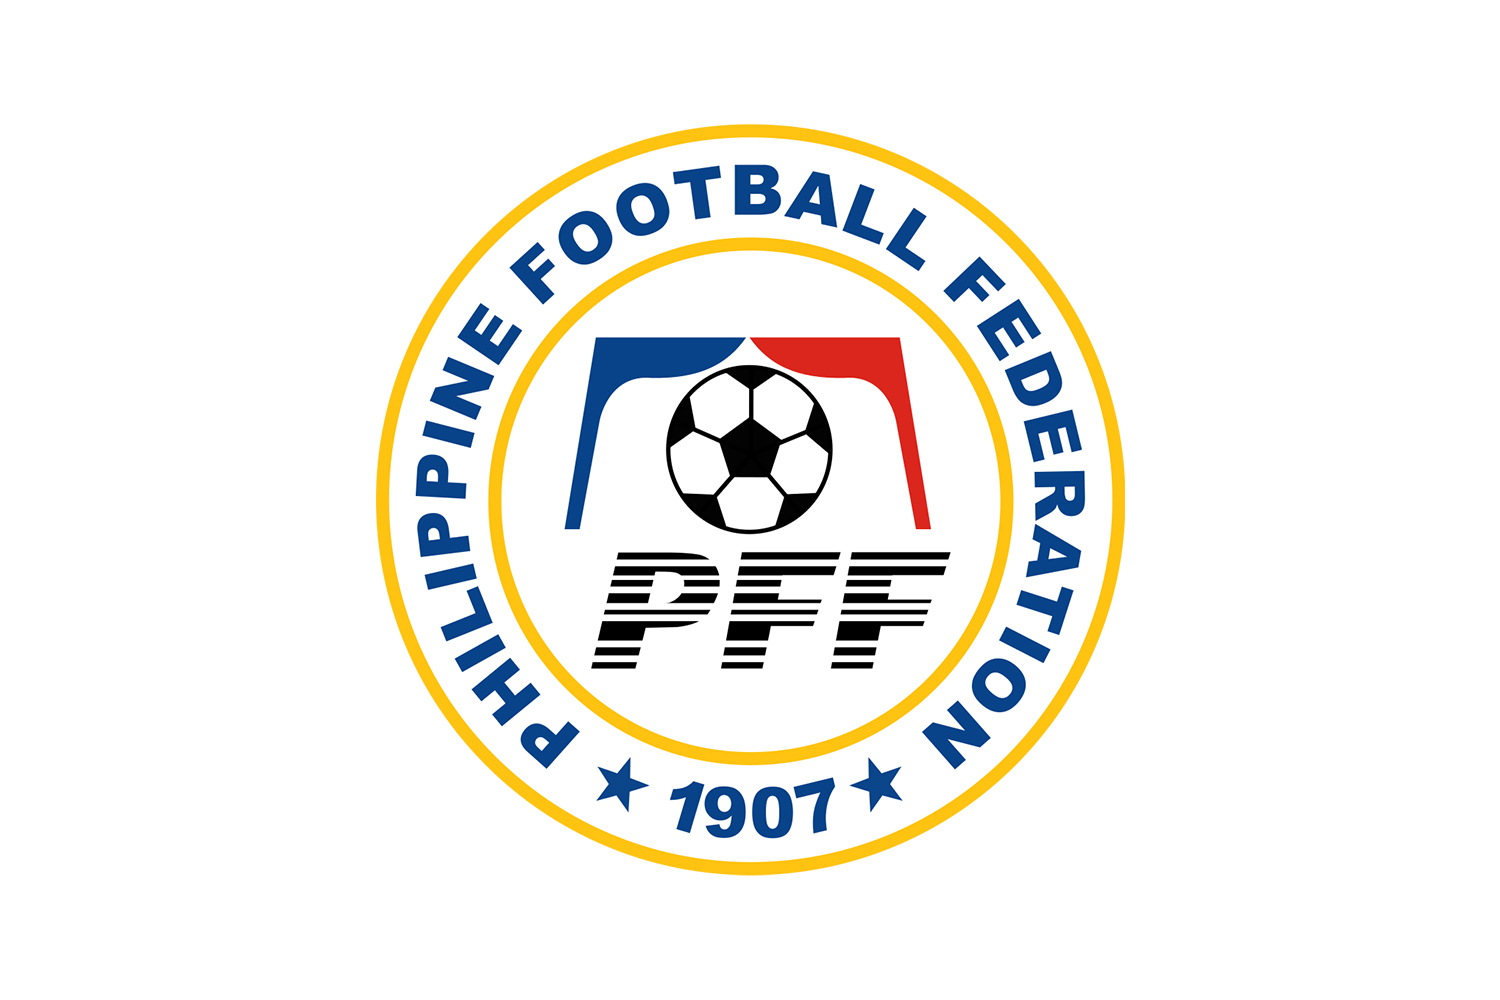 PFF Club Licensing Issues Decisions on Mendiola FC and Philippine Air